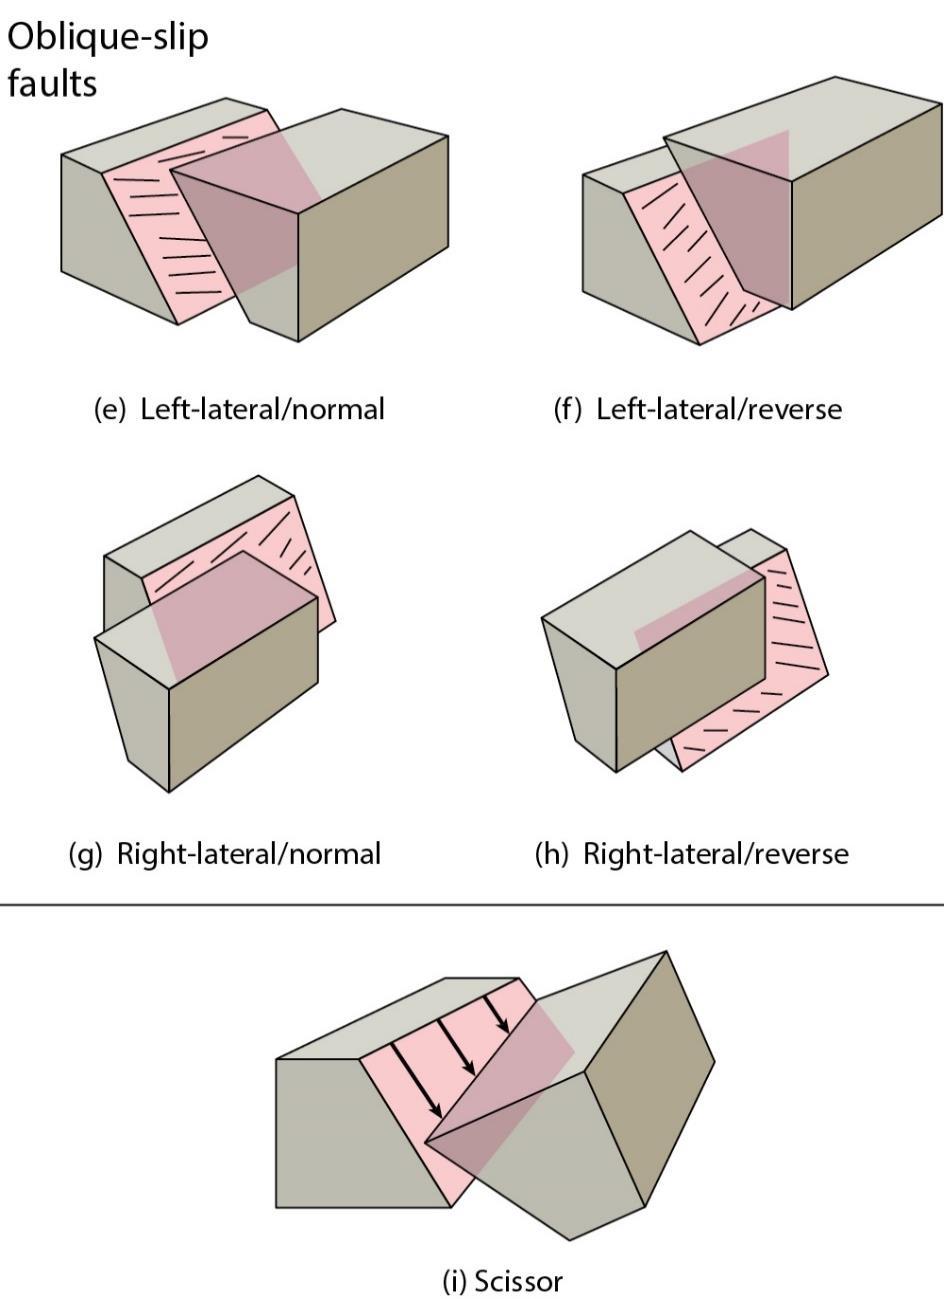 Fault Types: